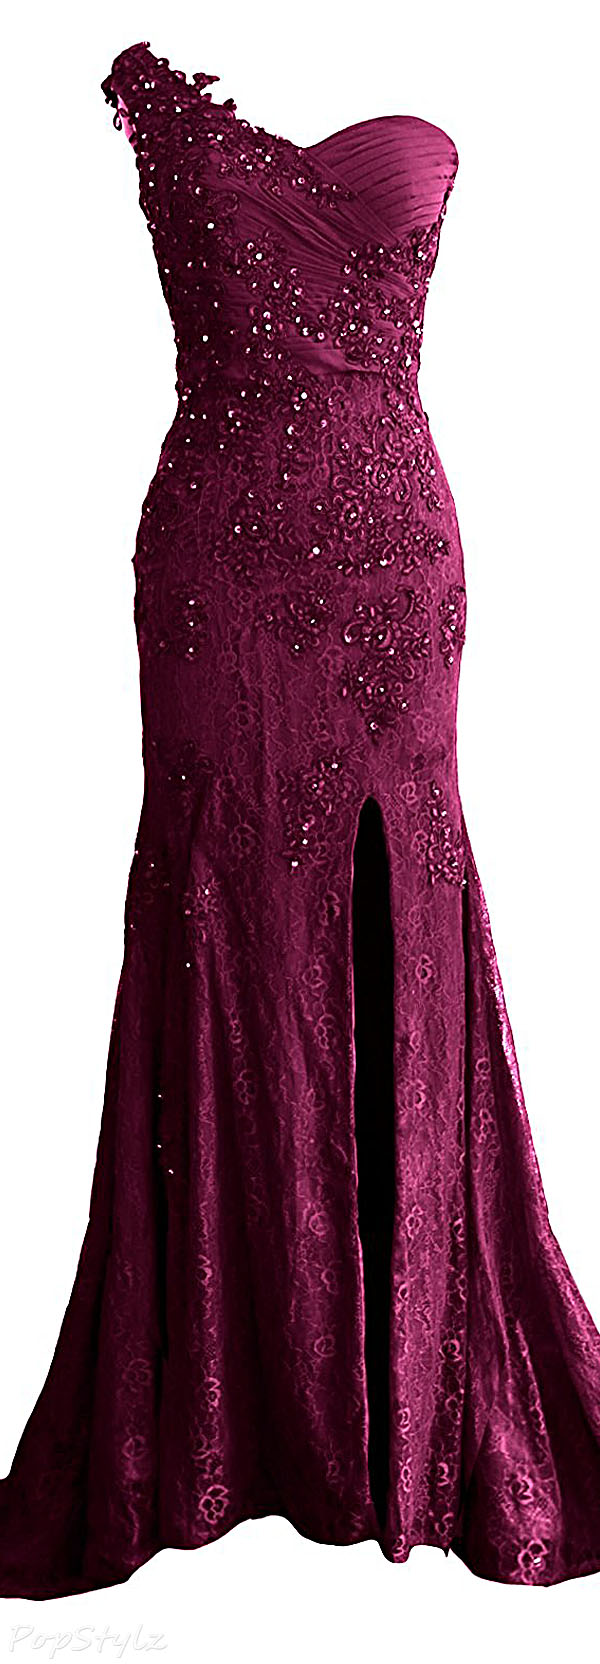 MACloth Lace Mermaid Evening Gown